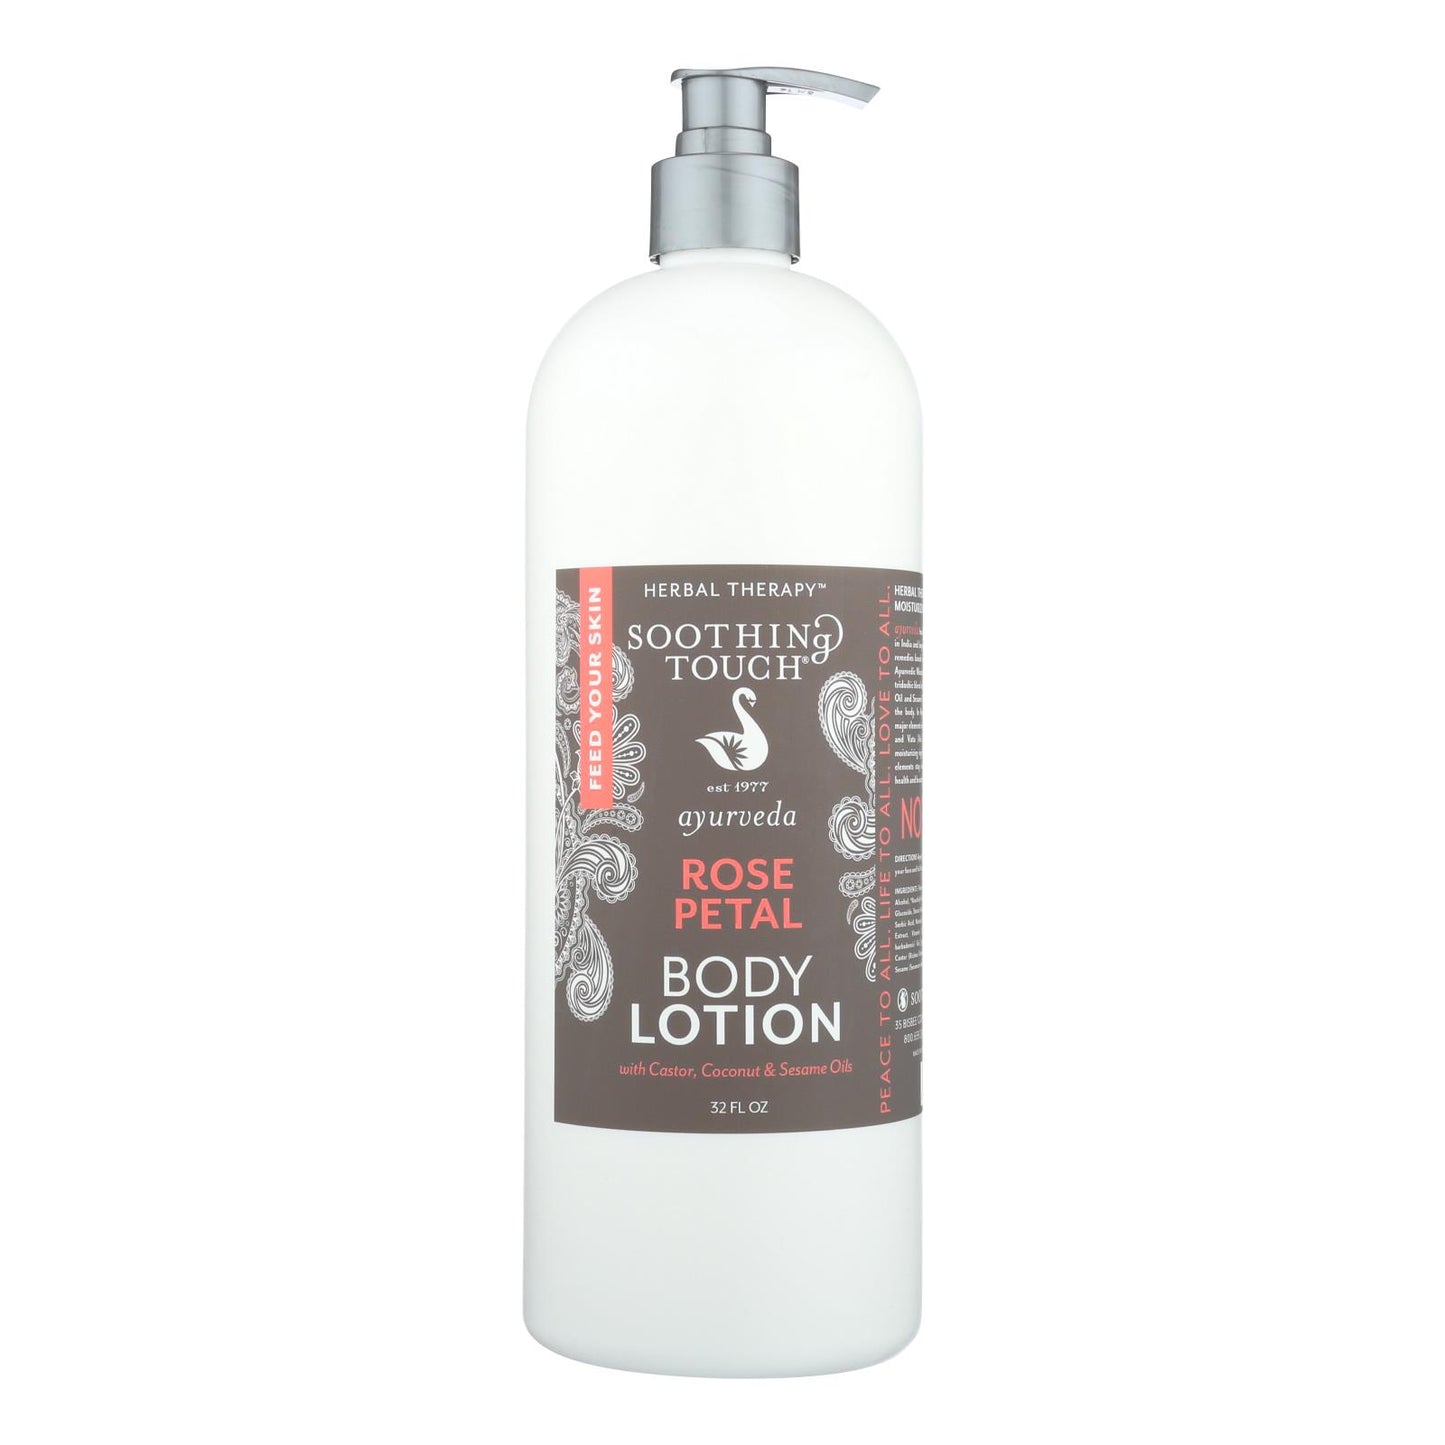 
                  
                    Soothing Touch Rose Petal Body Lotion - 32 fl oz.
                  
                